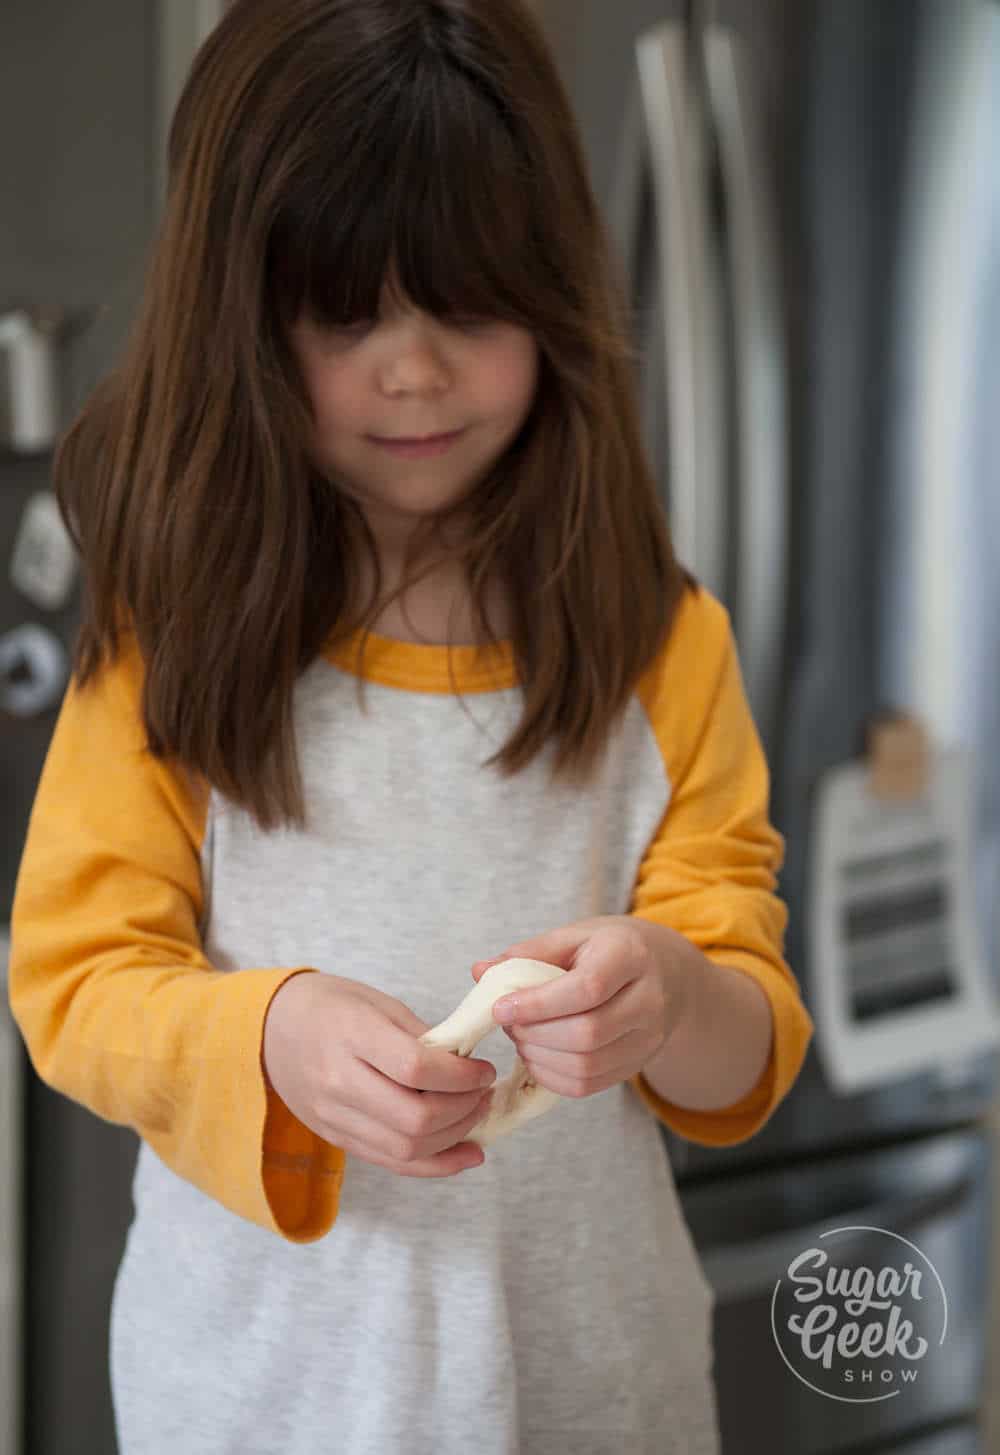 Little girl with brown shoulder-length hair and white and yellow shirt shaping a bagel with her hands